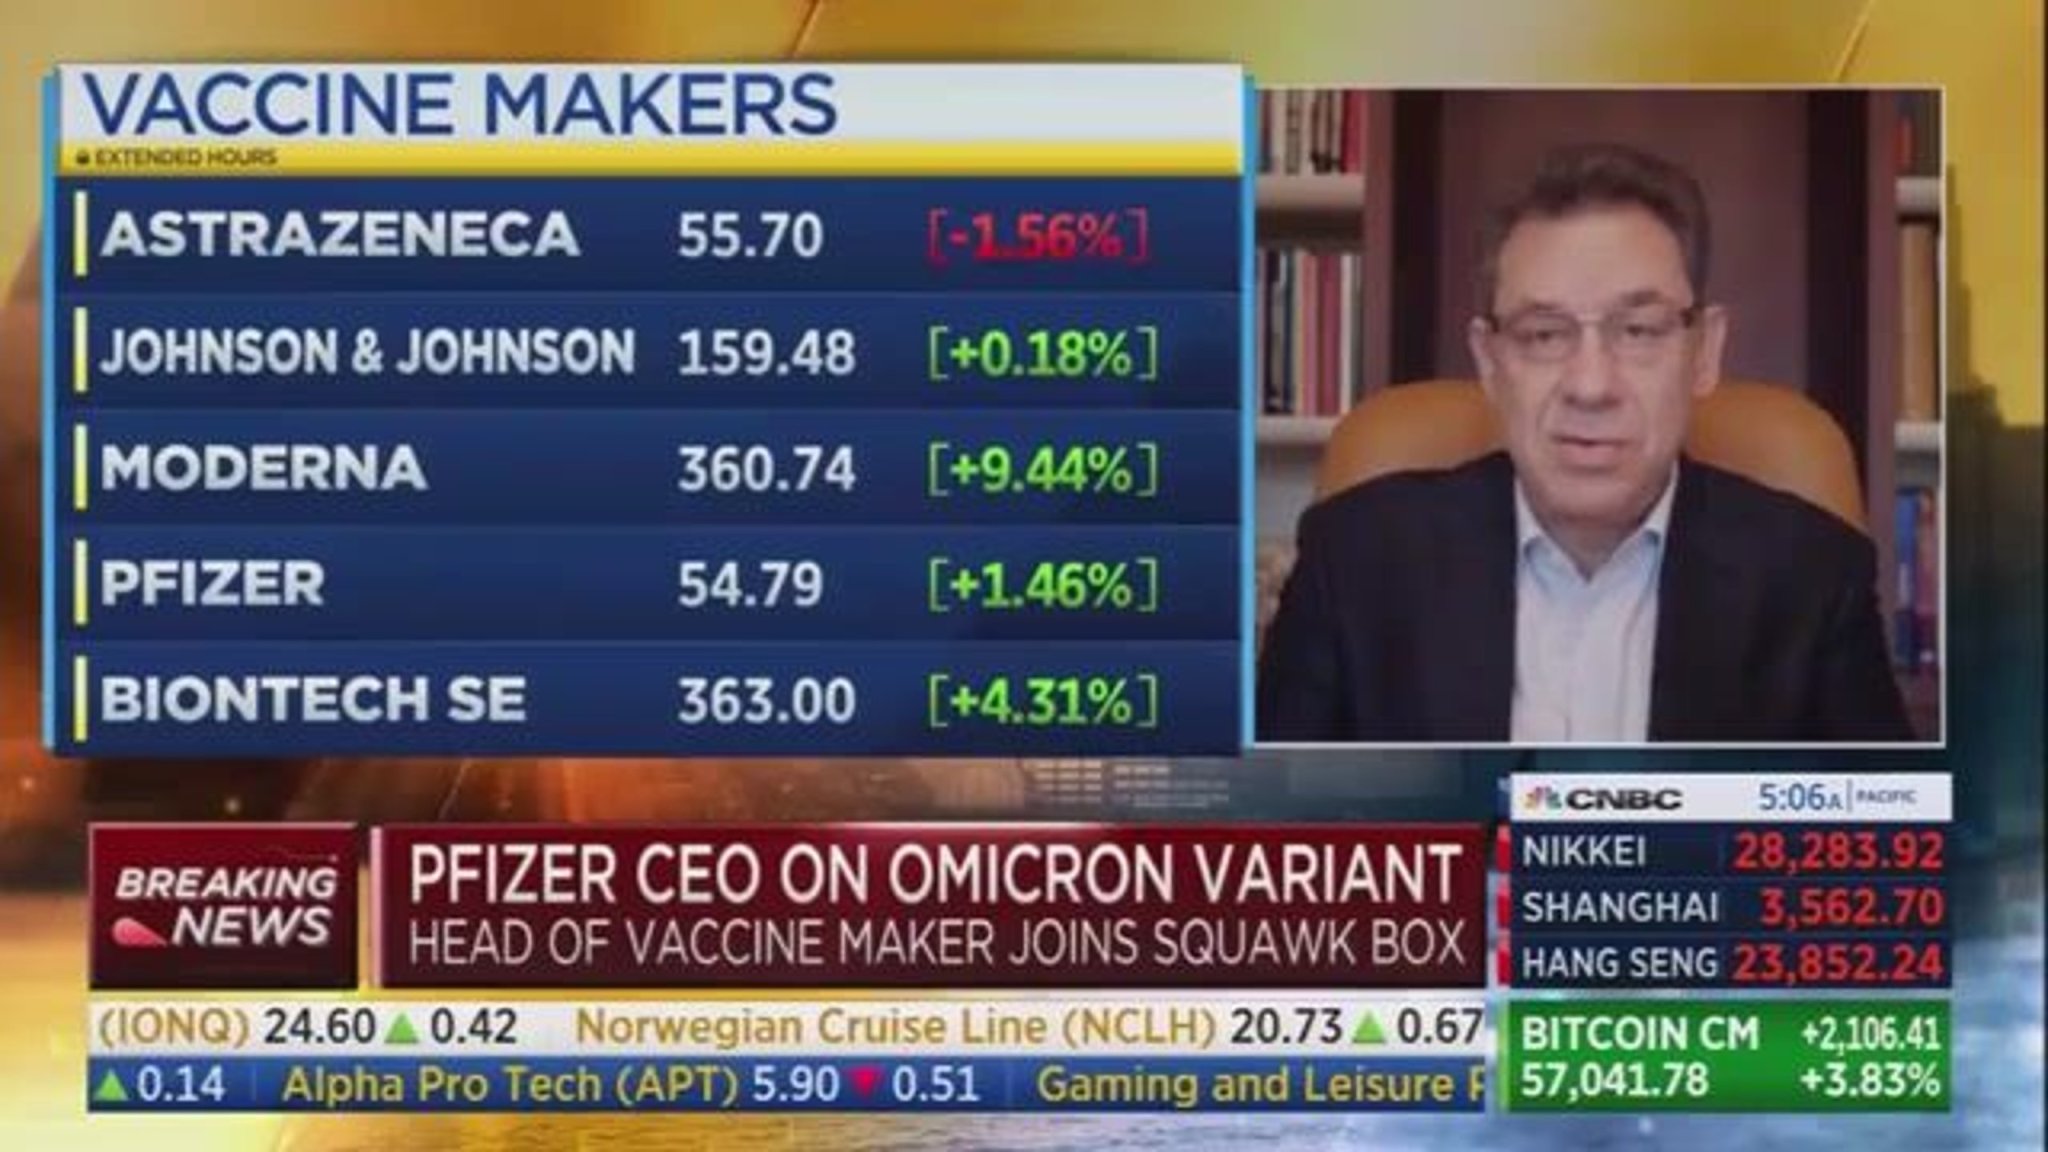 CEO Albert Bourla says Pfizer has already started to develop a new COVID vaccine amid threat from Omicron variant.